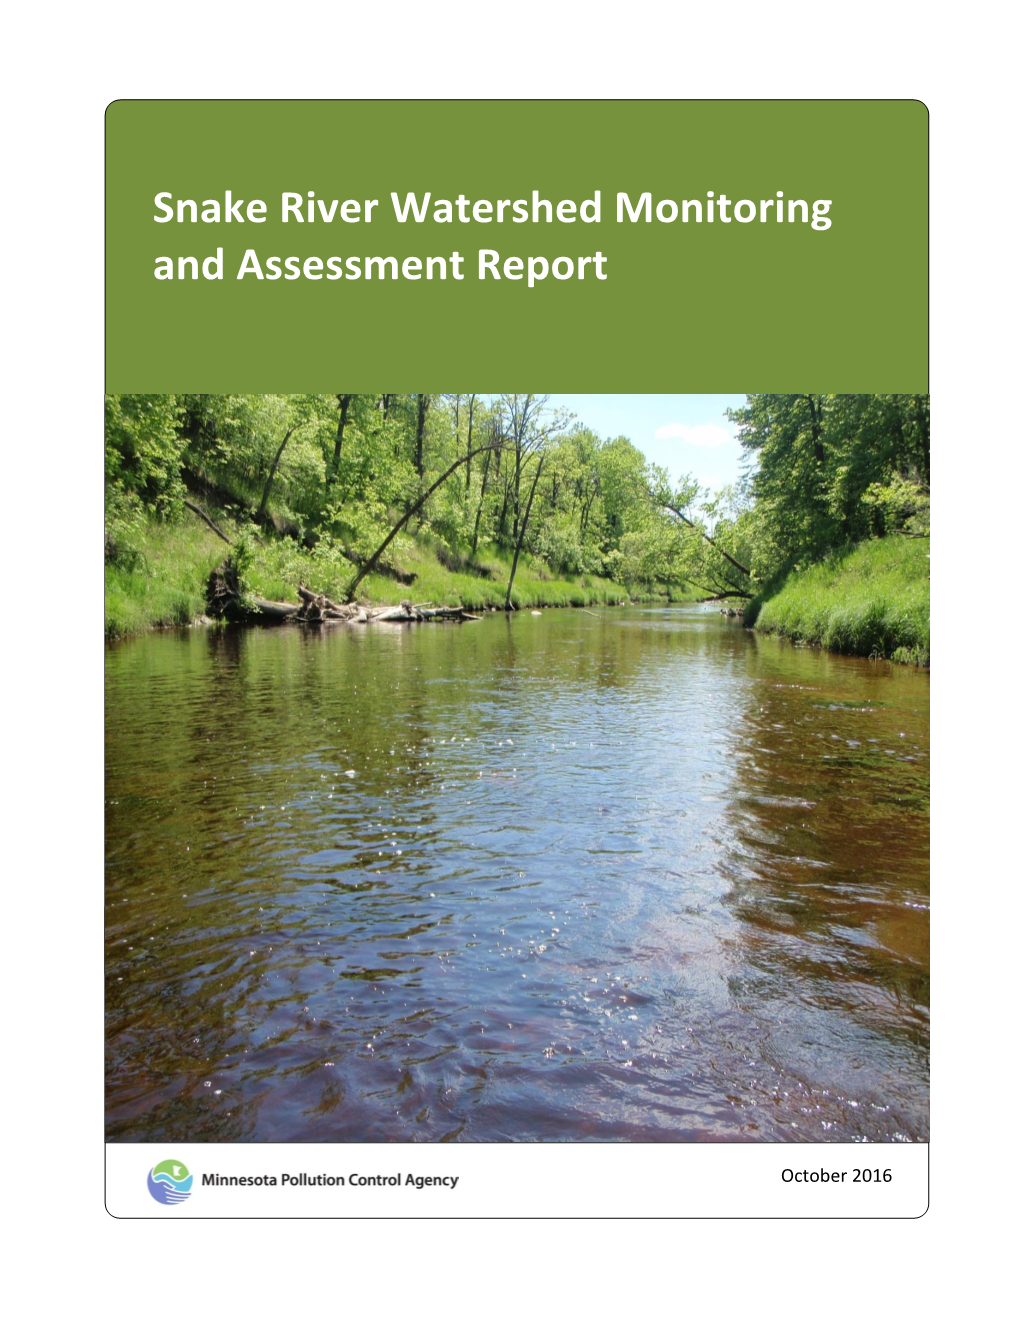 Snake River Watershed Monitoring and Assessment Report (Wq-Ws3-09020309B)